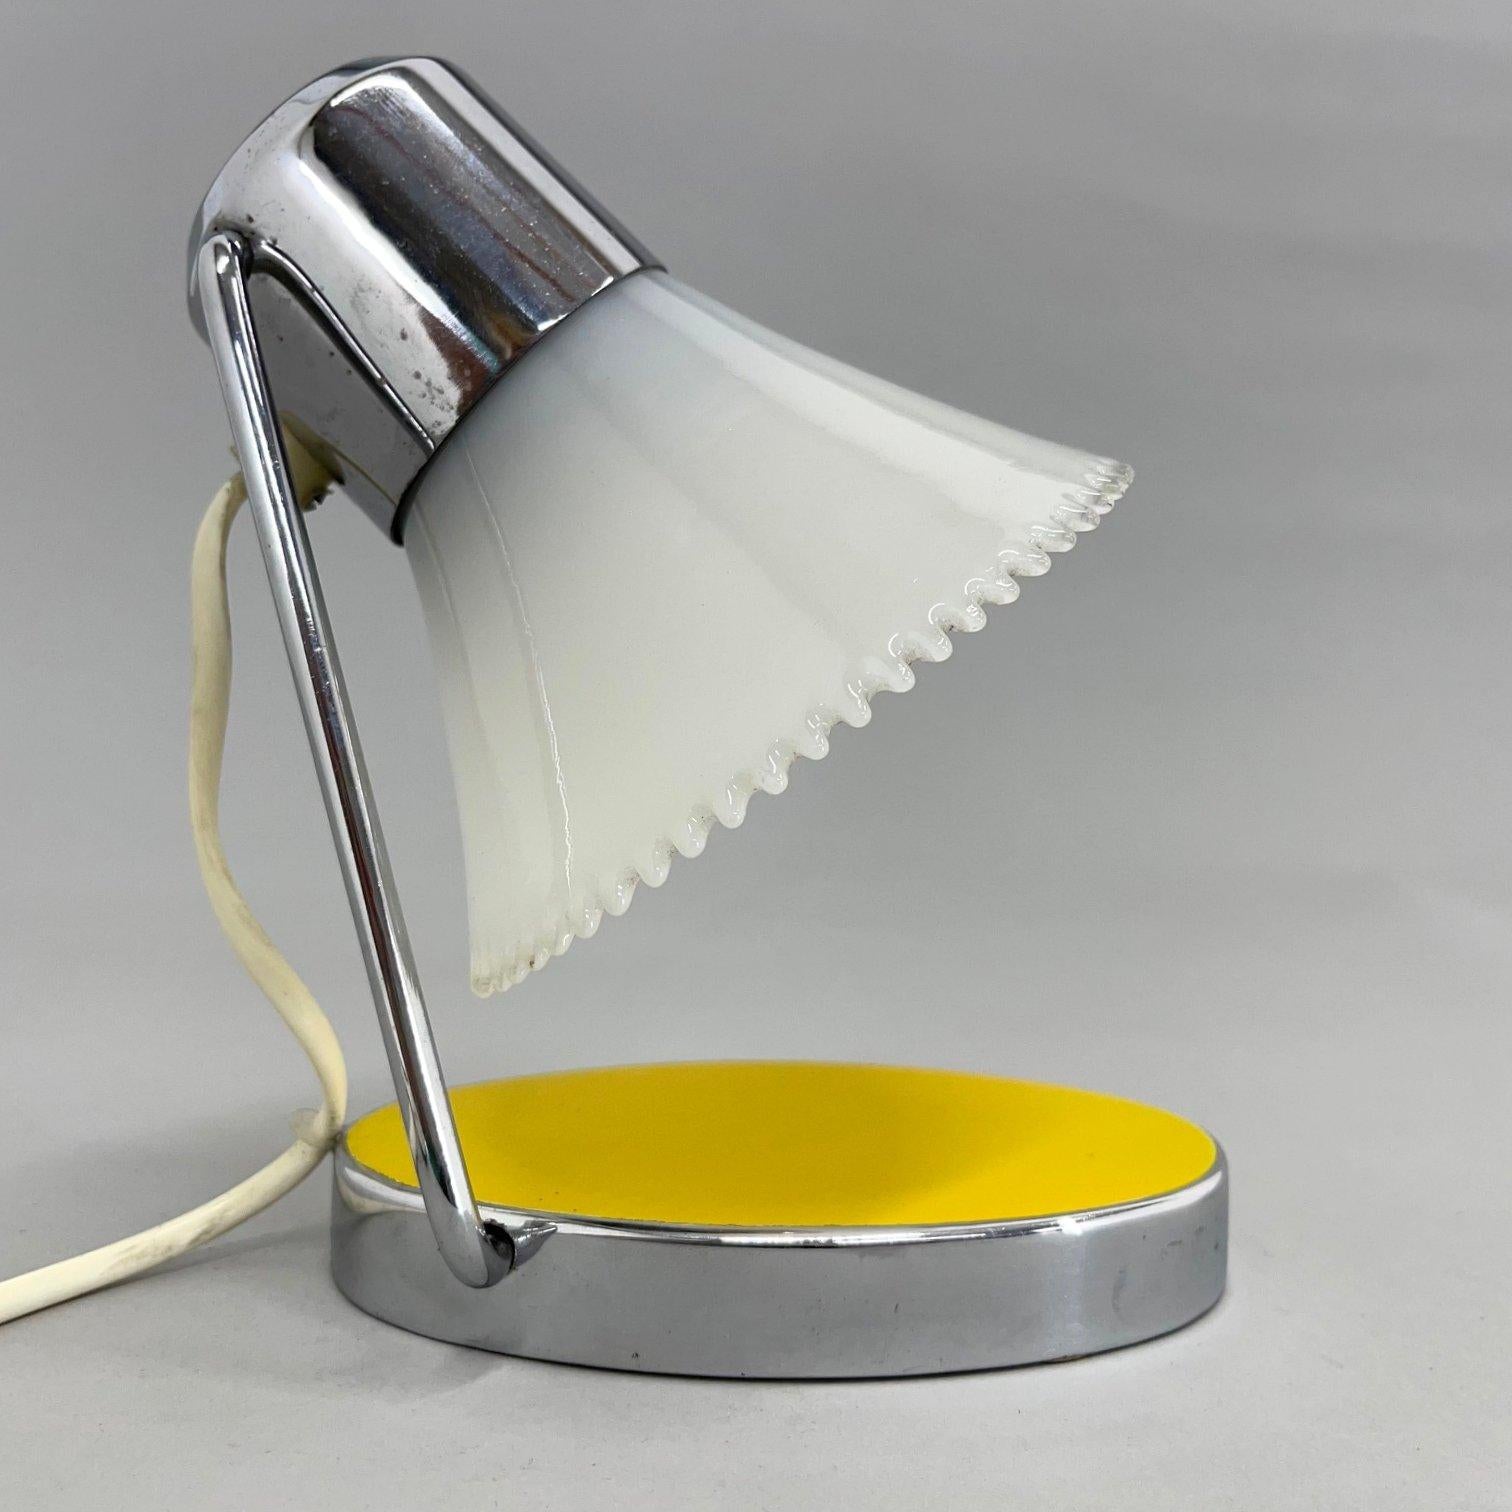 Small table lamp with adjustable shade from former Czechoslovakia.
Bulb: 1 x E25-E27.